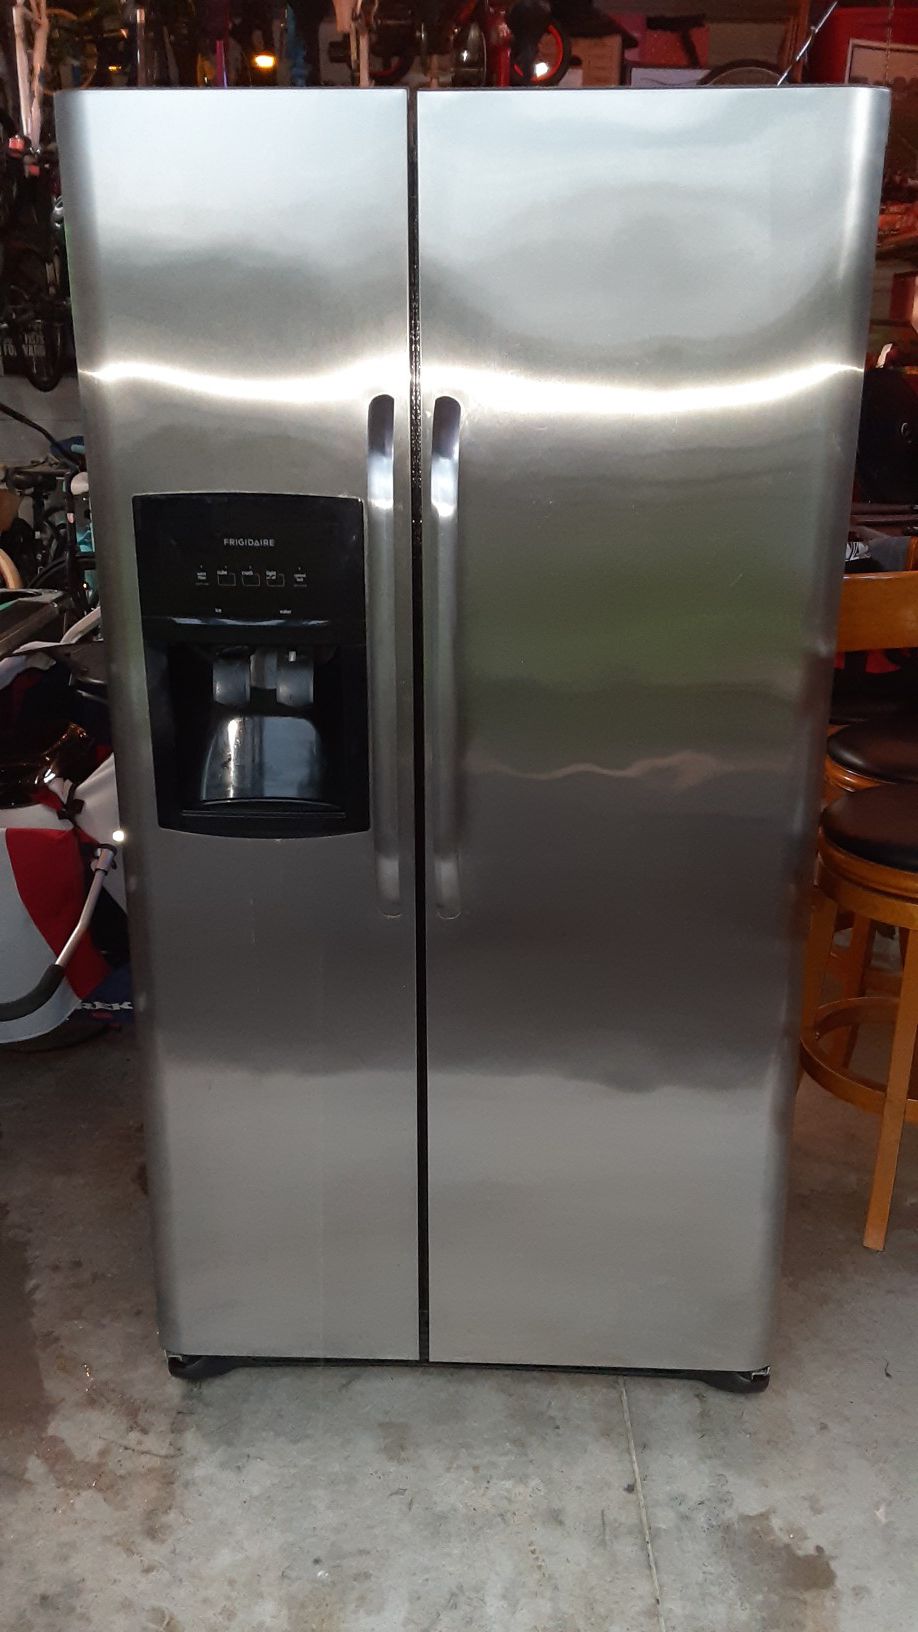 Stainless steel Frigidaire Side by Side.